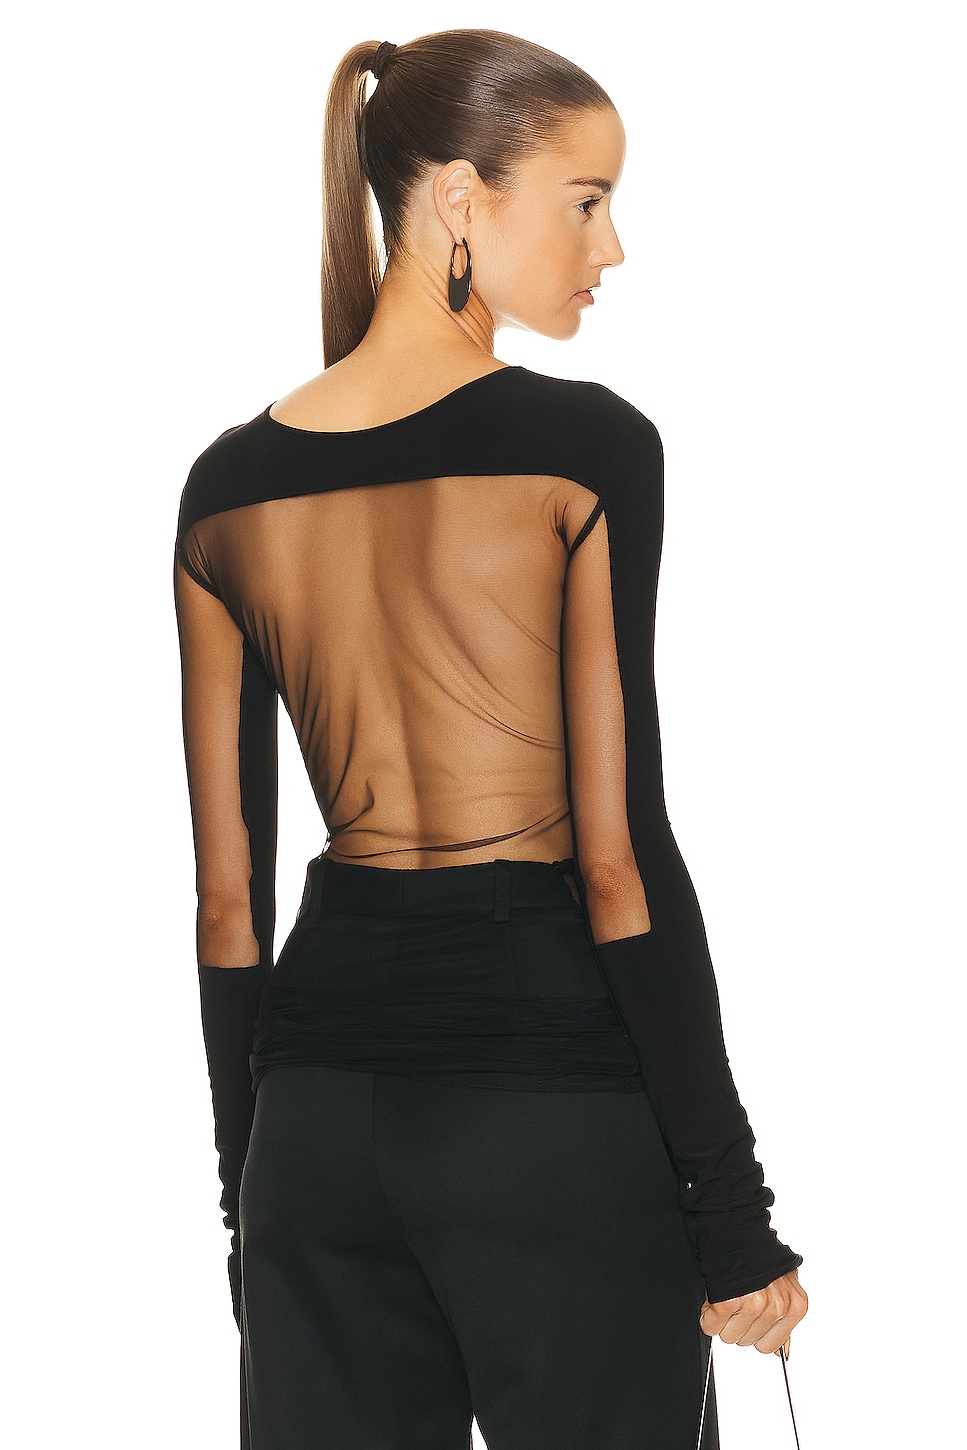 Image 1 of Grace Ling Square Sheer Cut Out Top in Black